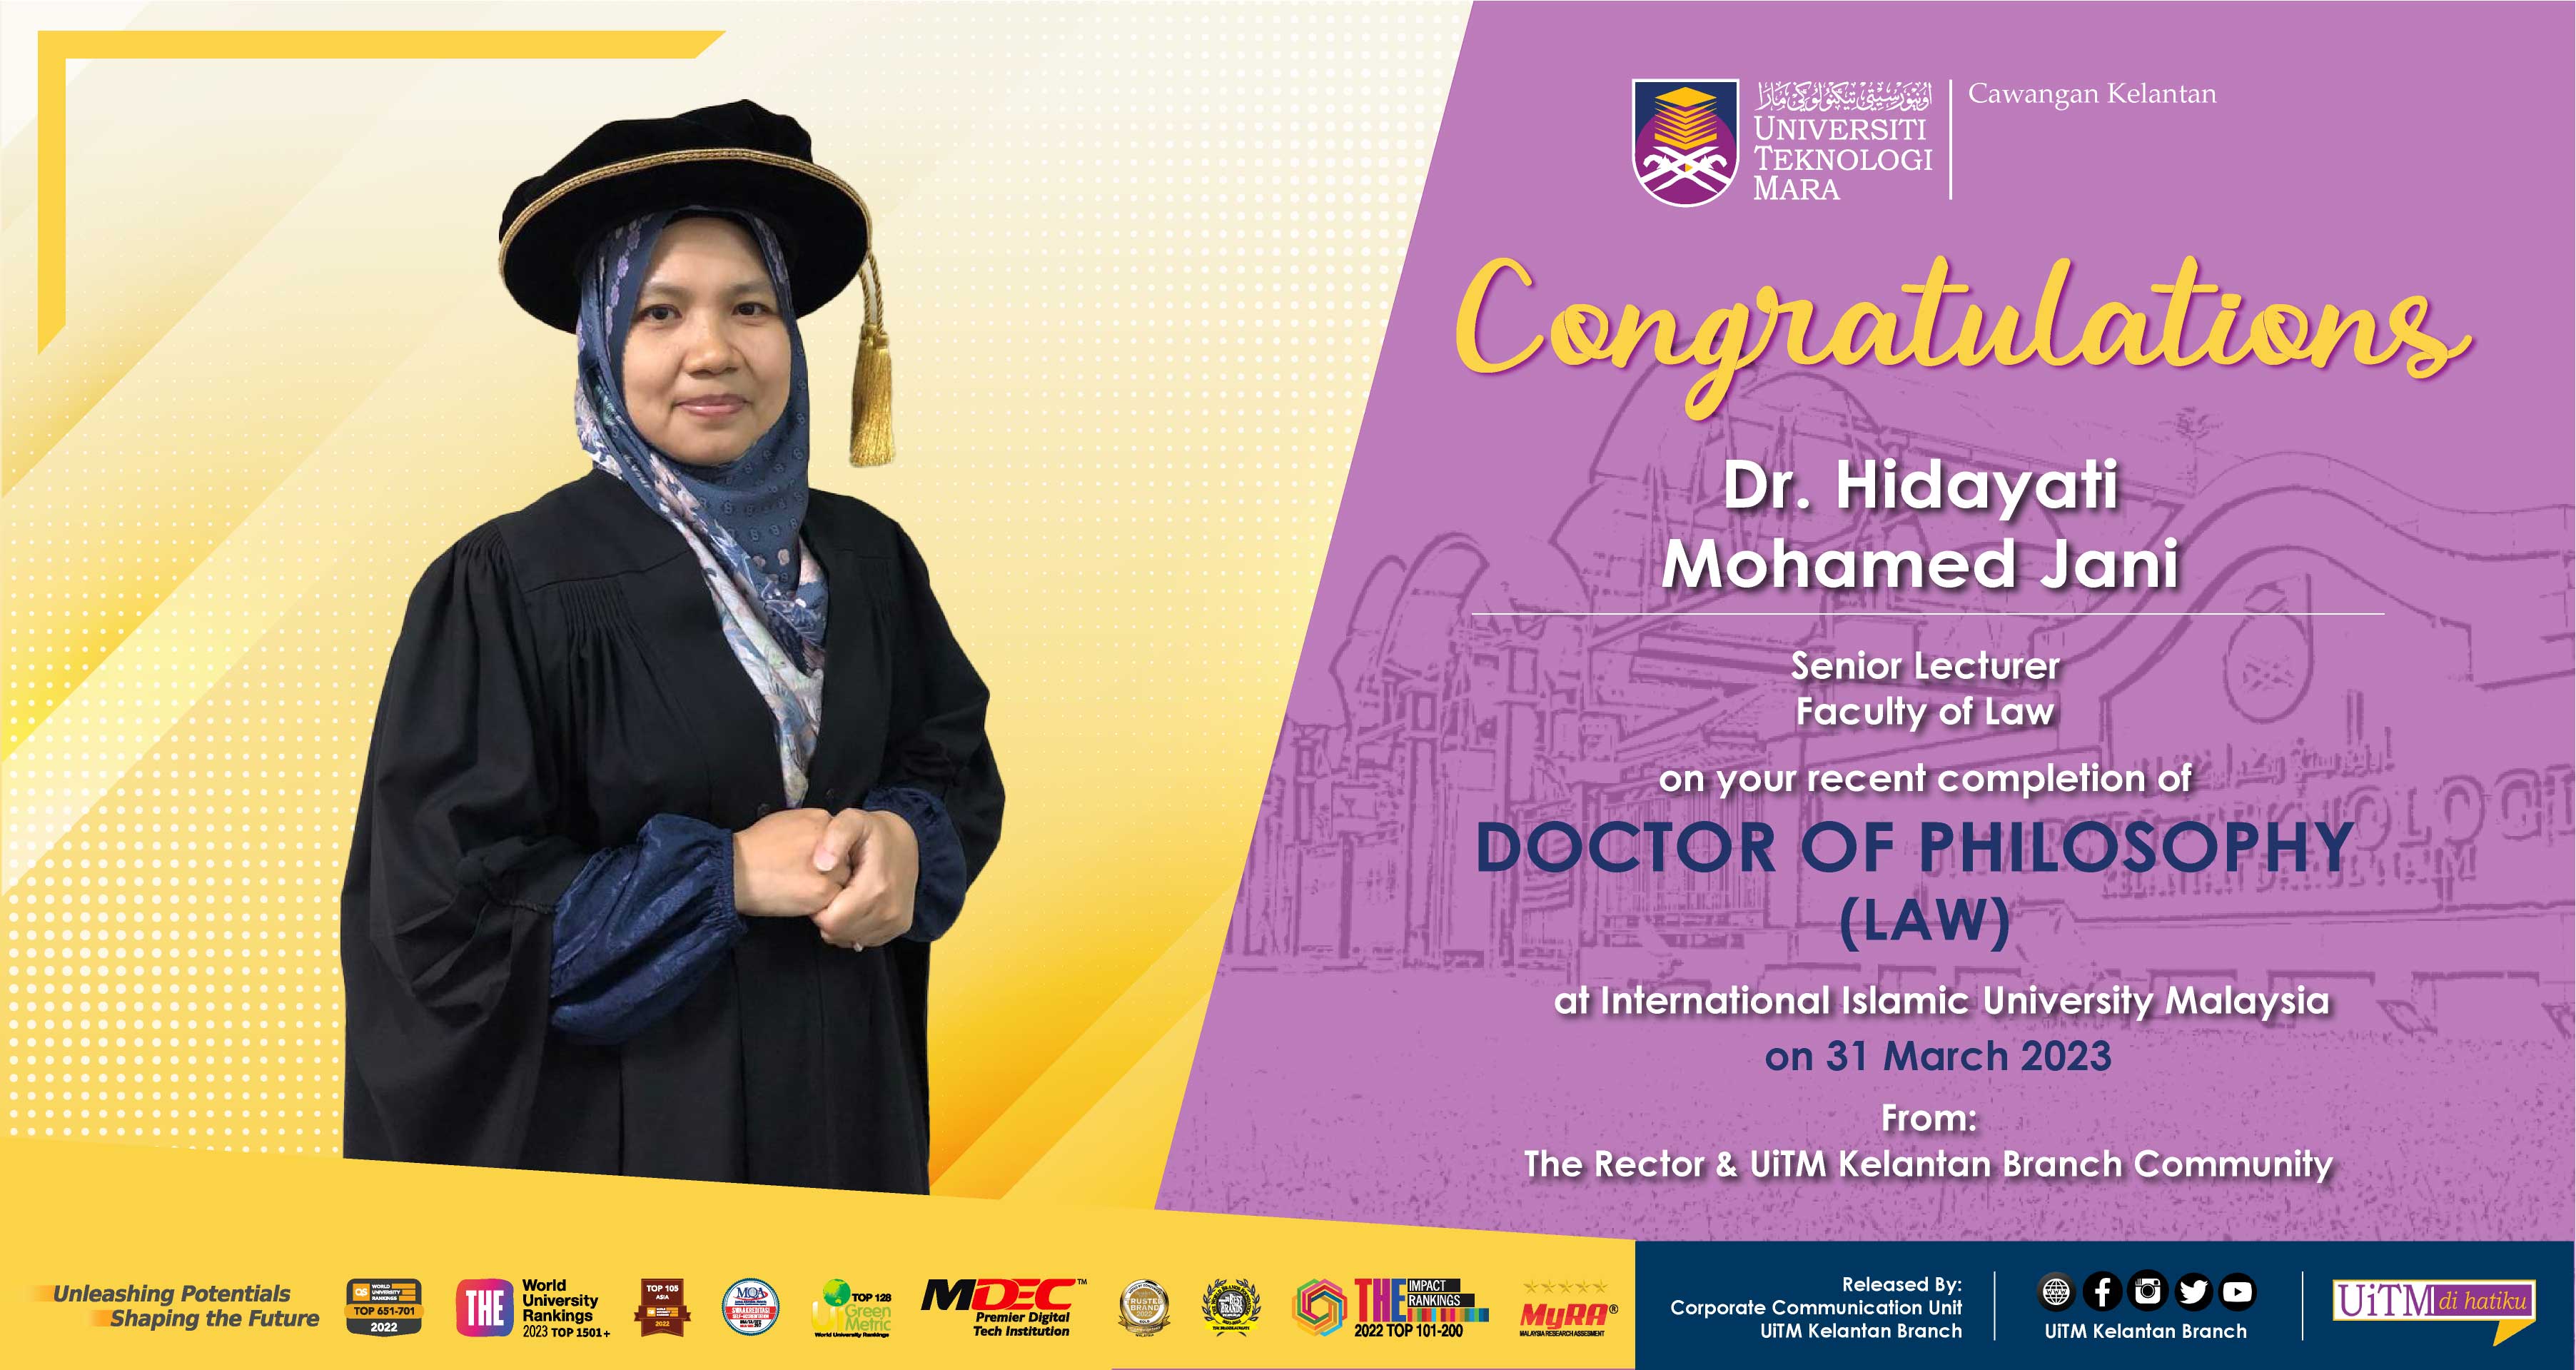 Congratulations!!! Dr. Hidayati Mohamed Jani, Doctor of Philosophy (Law)